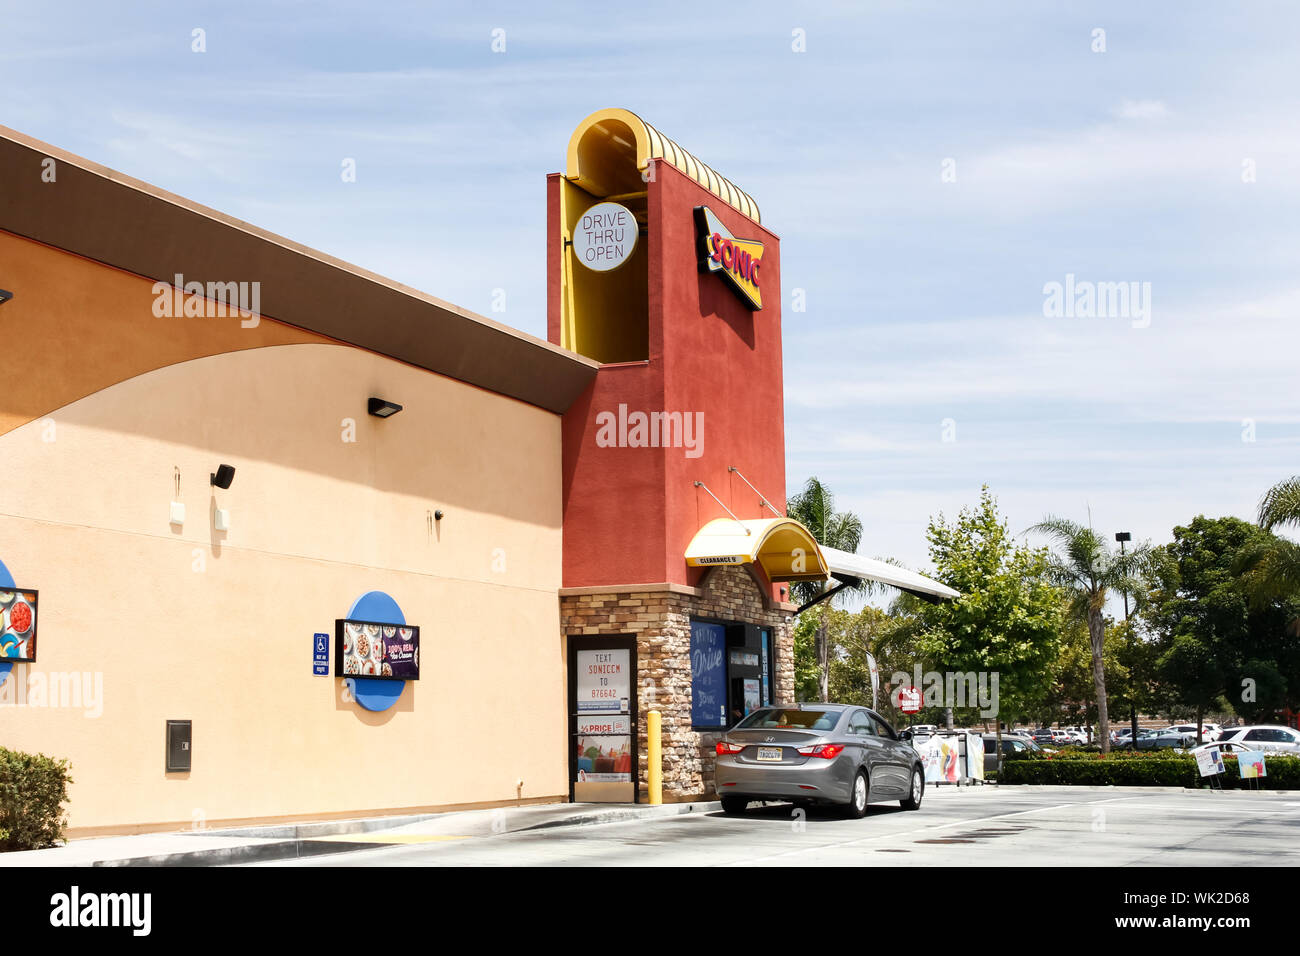 Sonic Drive-In restaurants, addresses, phone numbers, photos, real